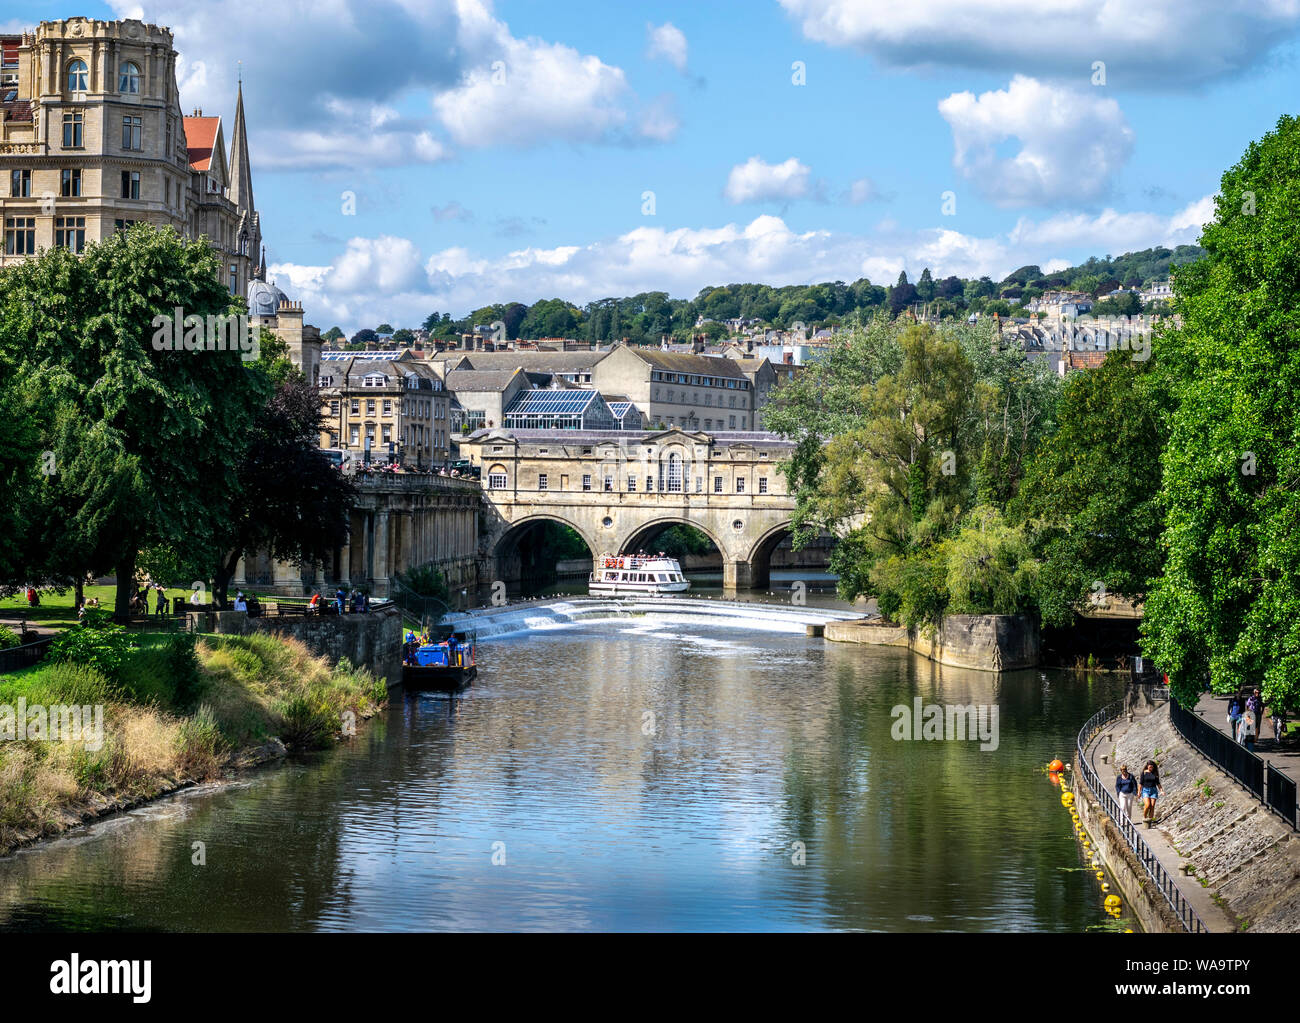 The famous Pulteney Bridge, Bath with shops lining both sides. A crossing over the River Avon Stock Photo